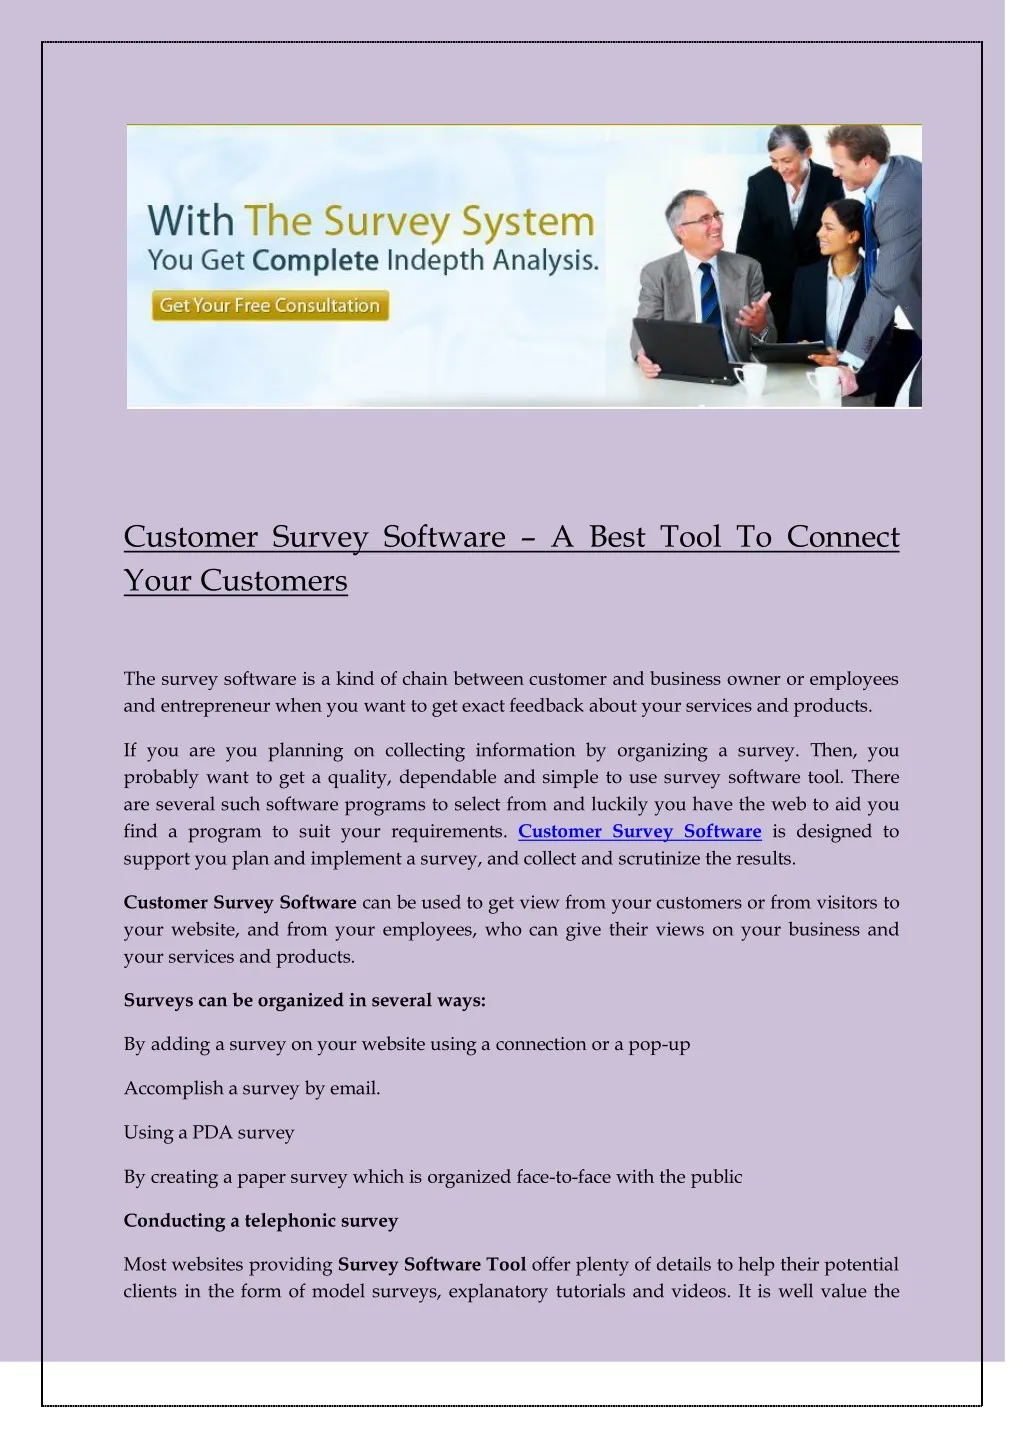 customer survey software a best tool to connect